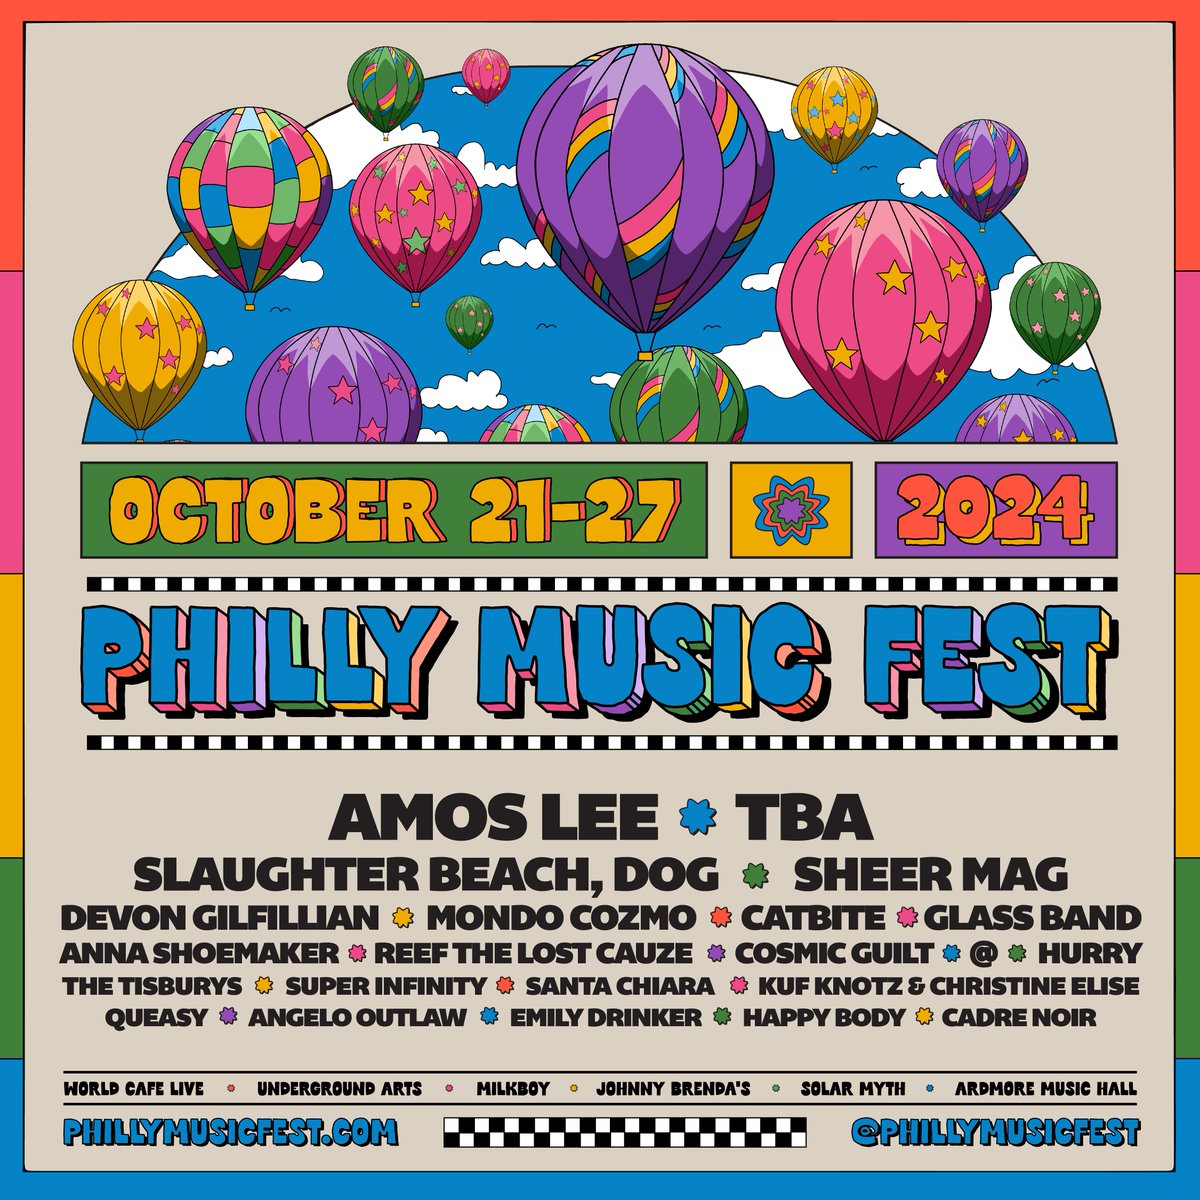 **Just Announced** Philly Music Fest returns this October and we are very excited to be a part of it again for 2024! We host Devon Gilfillian + Mondo Cozmo, Emily Drinker, and The Tisburys on 10.26 🎉 - Tickets on sale this Friday at 10a!